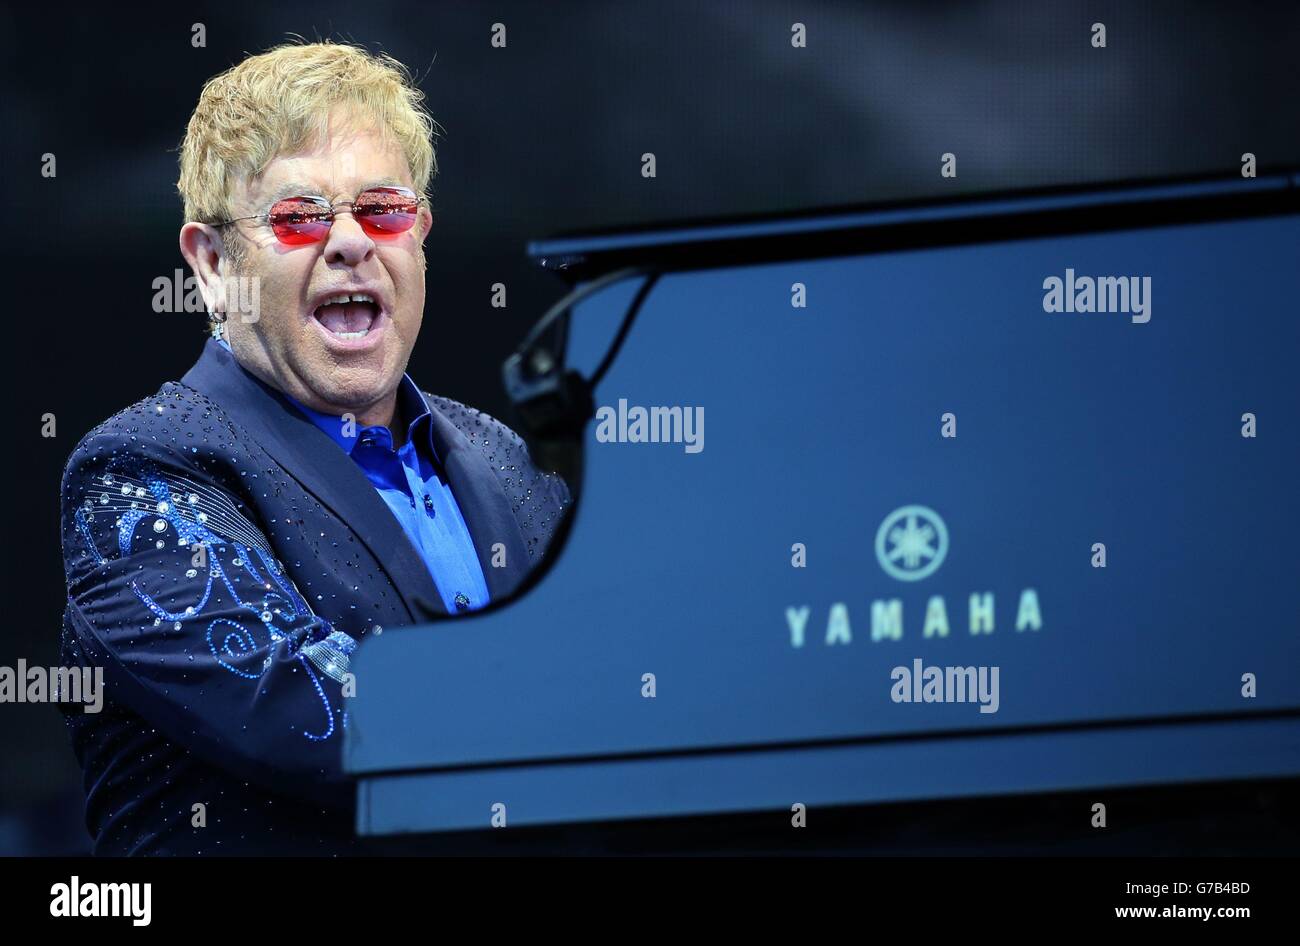 Elton John performing on stage in a special open air show at the Meadowbank Stadium in Edinburgh, during his Wonderful Crazy Night Tour. Stock Photo